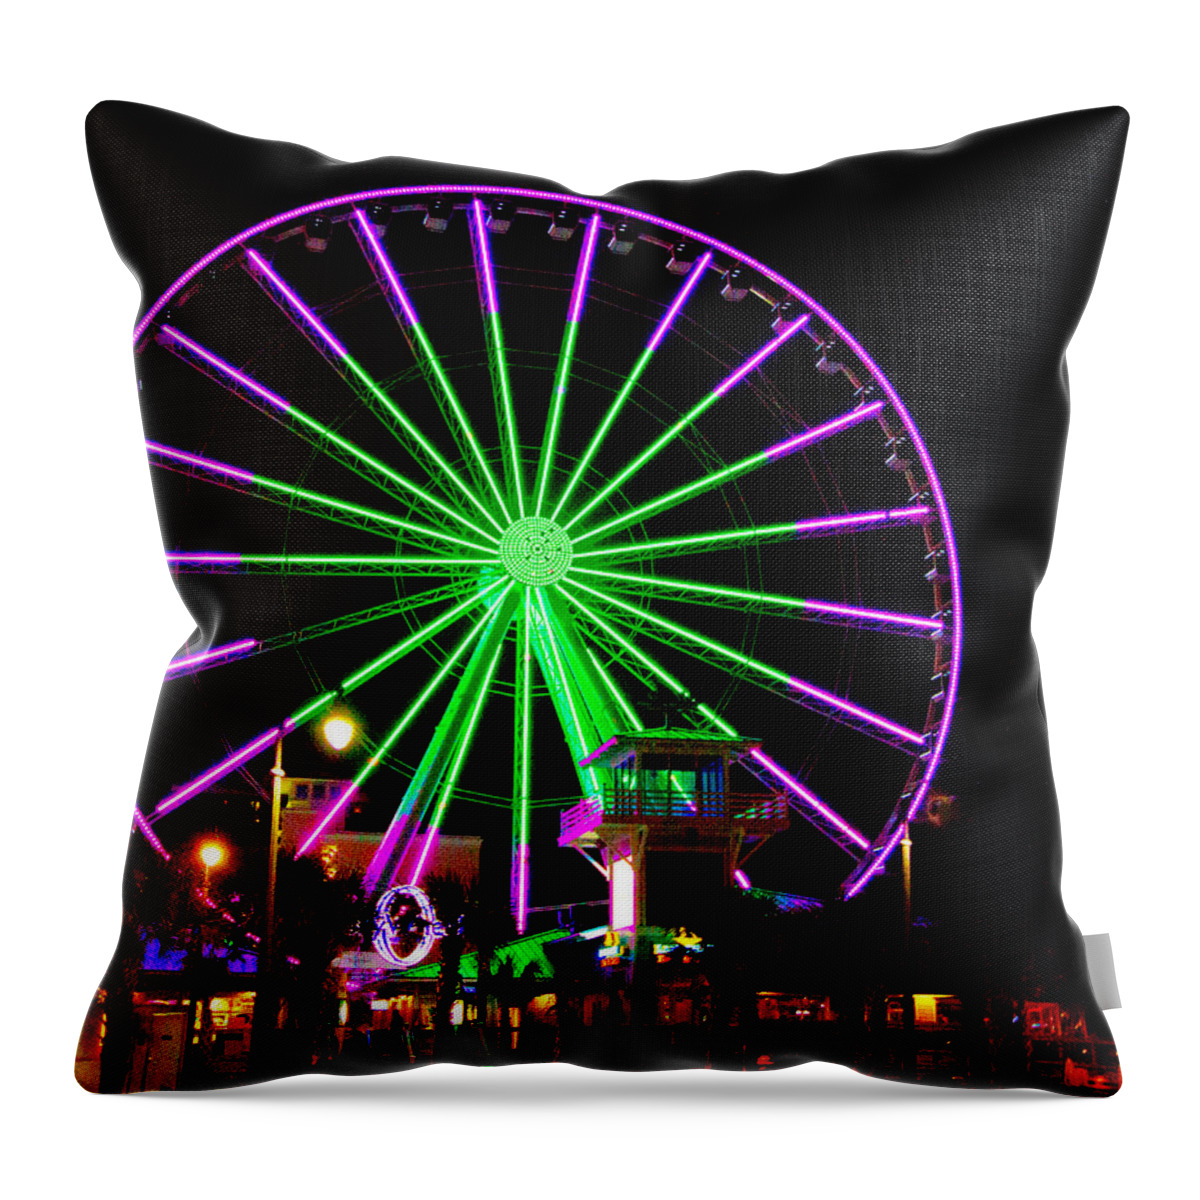 Sky Wheel Throw Pillow featuring the photograph Sky Wheel by Bill Barber